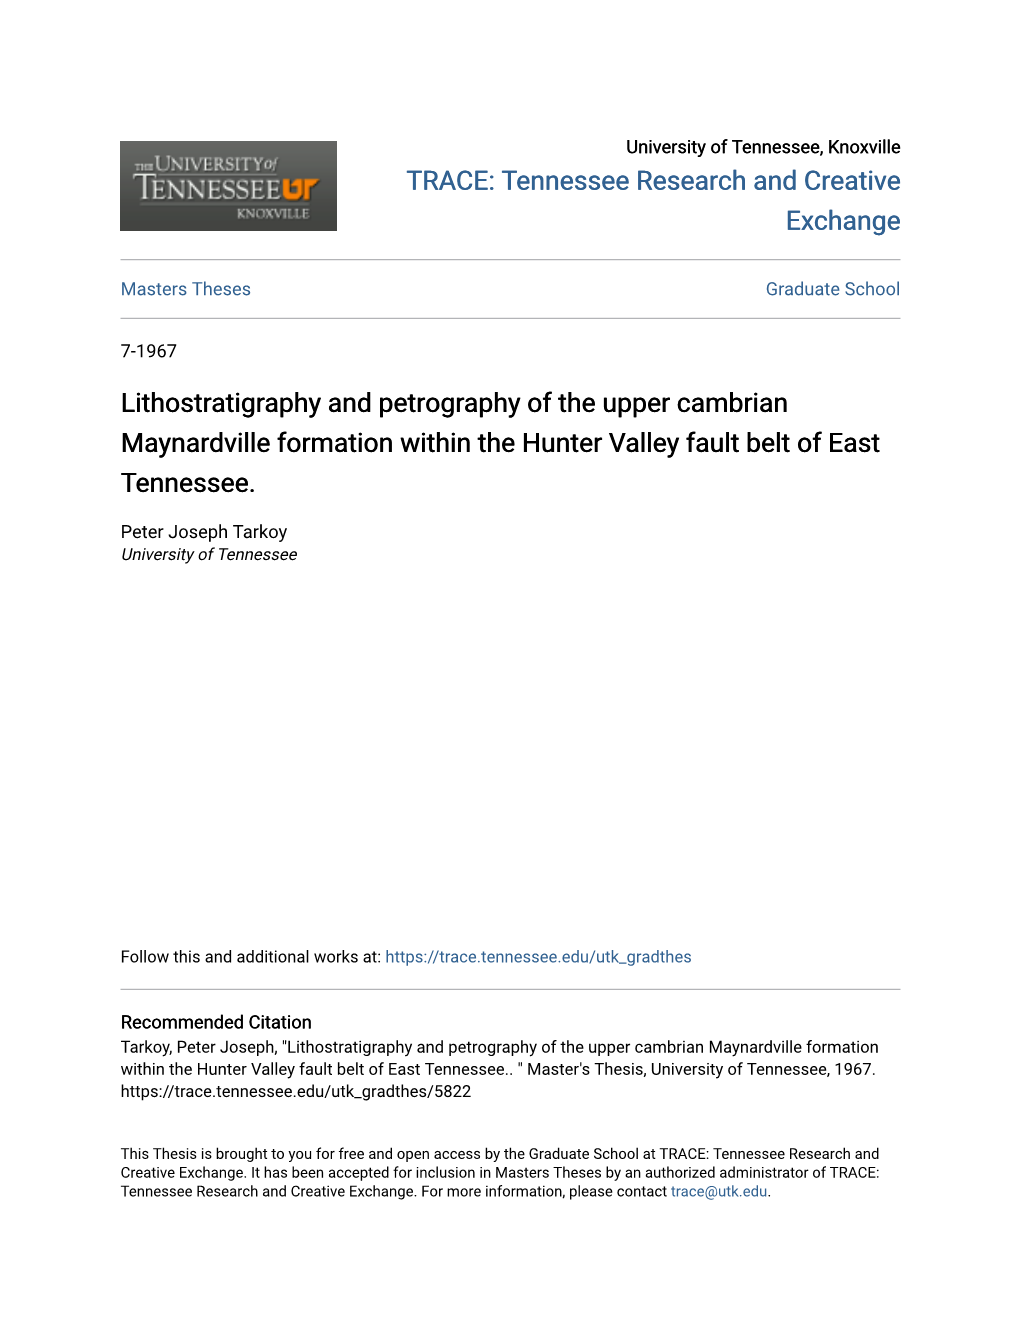 Lithostratigraphy and Petrography of the Upper Cambrian Maynardville Formation Within the Hunter Valley Fault Belt of East Tennessee